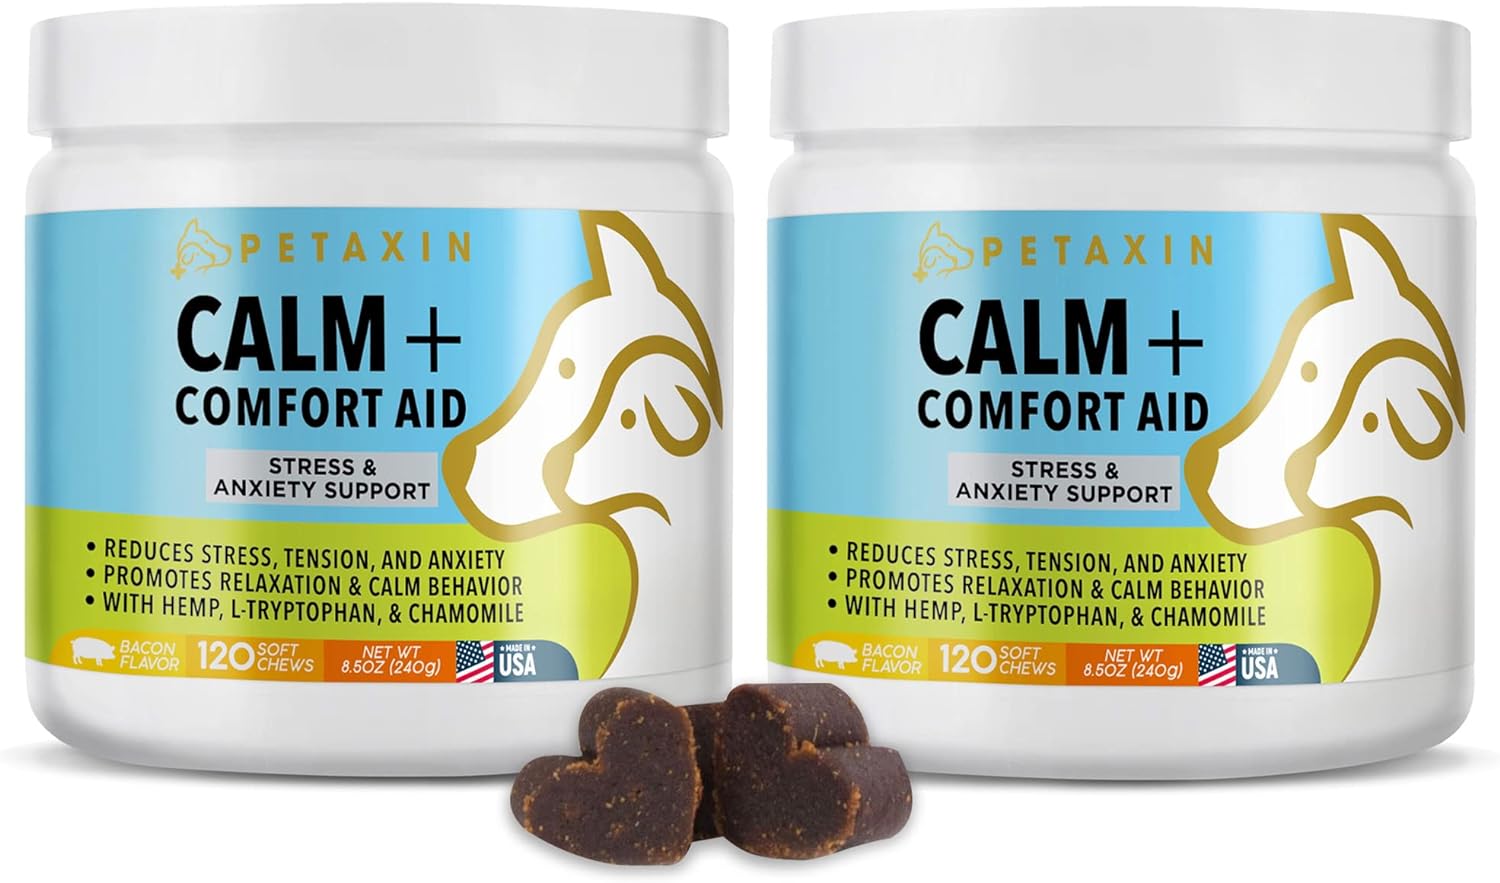 2 Pack Petaxin Calming Treats for Dogs - Stress & Anxiety Relief for Dogs - Supports Calm & Relaxed Behavior - Calming Chews for Dogs with Chamomile, Ginger, & More for Barking, Fireworks - 240 Chews